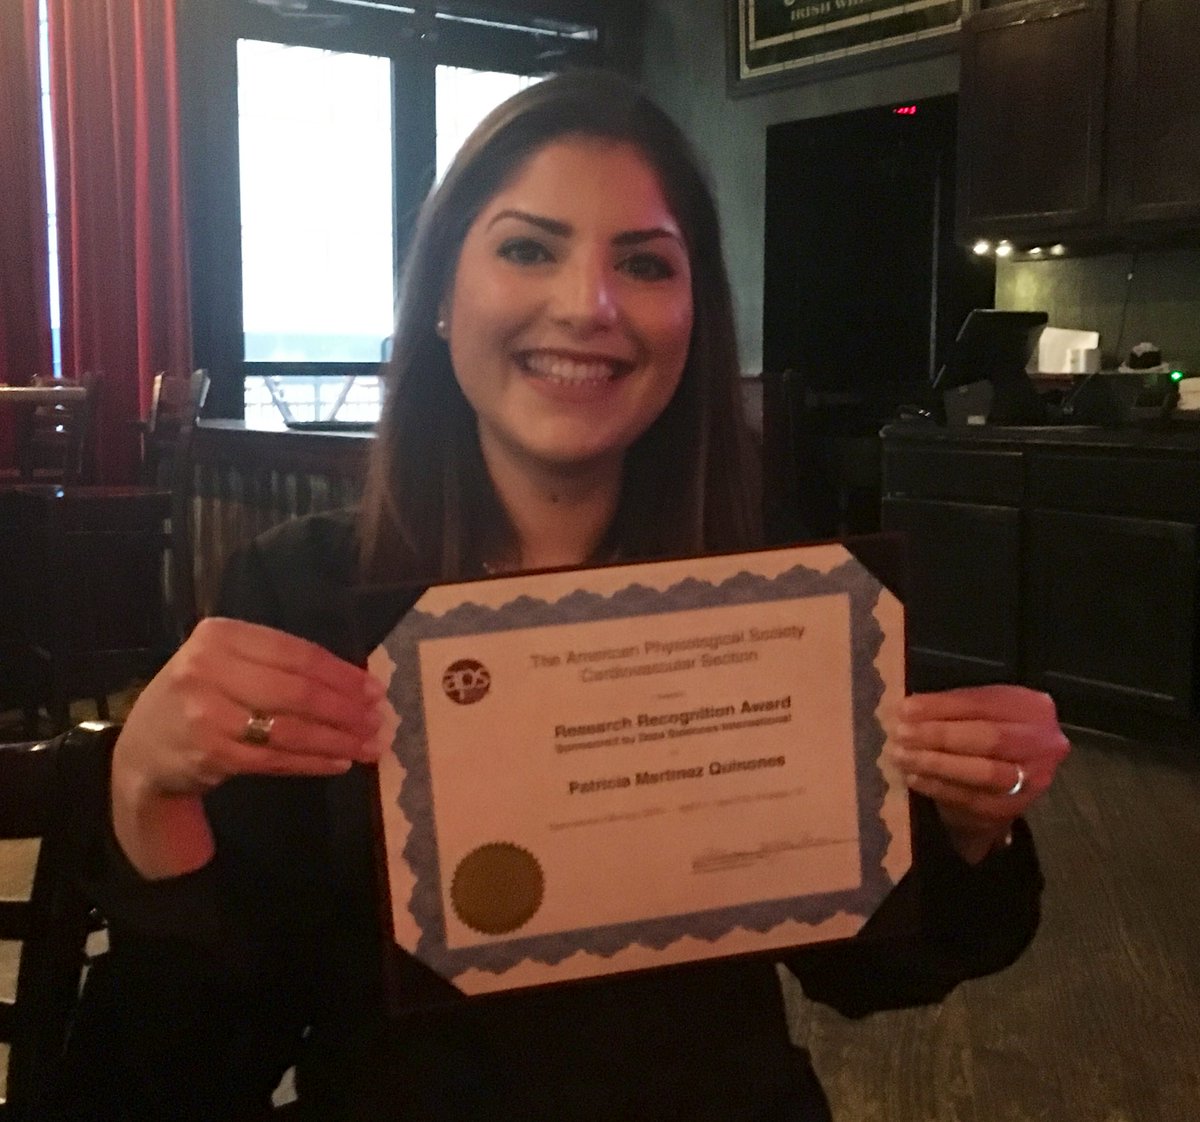 Congratulations @PMartinezMD on your poster presentation cardiotoxic effects of mTOR inhibitor PP242 at @expbio and Research Recognition Award from @APSPhysiology! #SurgeonScientist #ExpBio19 #hypertension #APSatEB